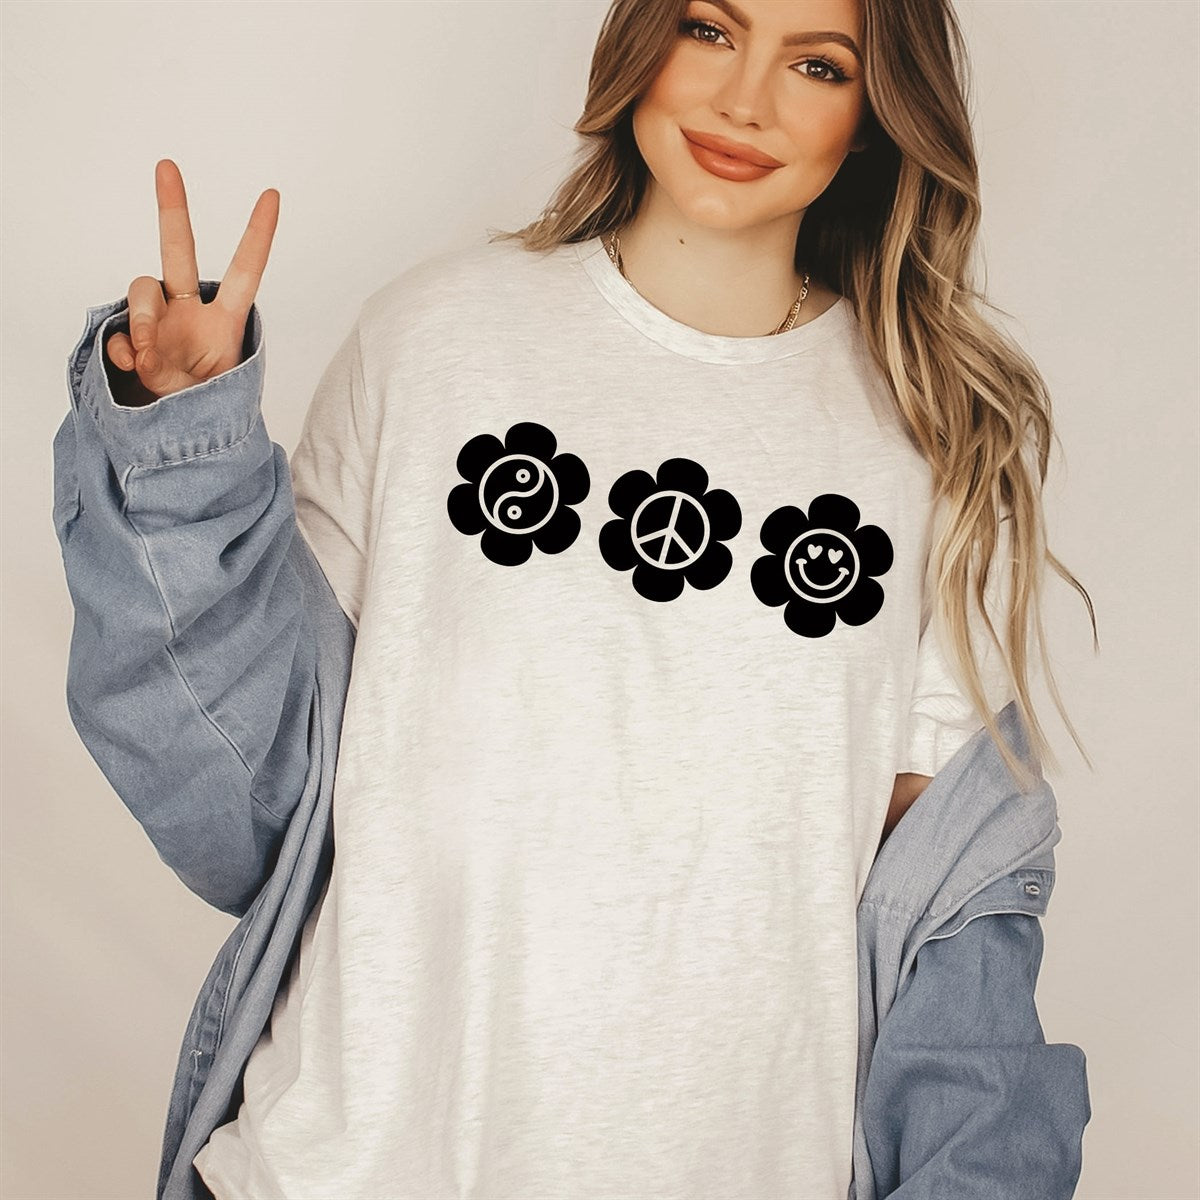 Three Flowers With Yin-Yang, Peace Sign, & Smiley Face Tee